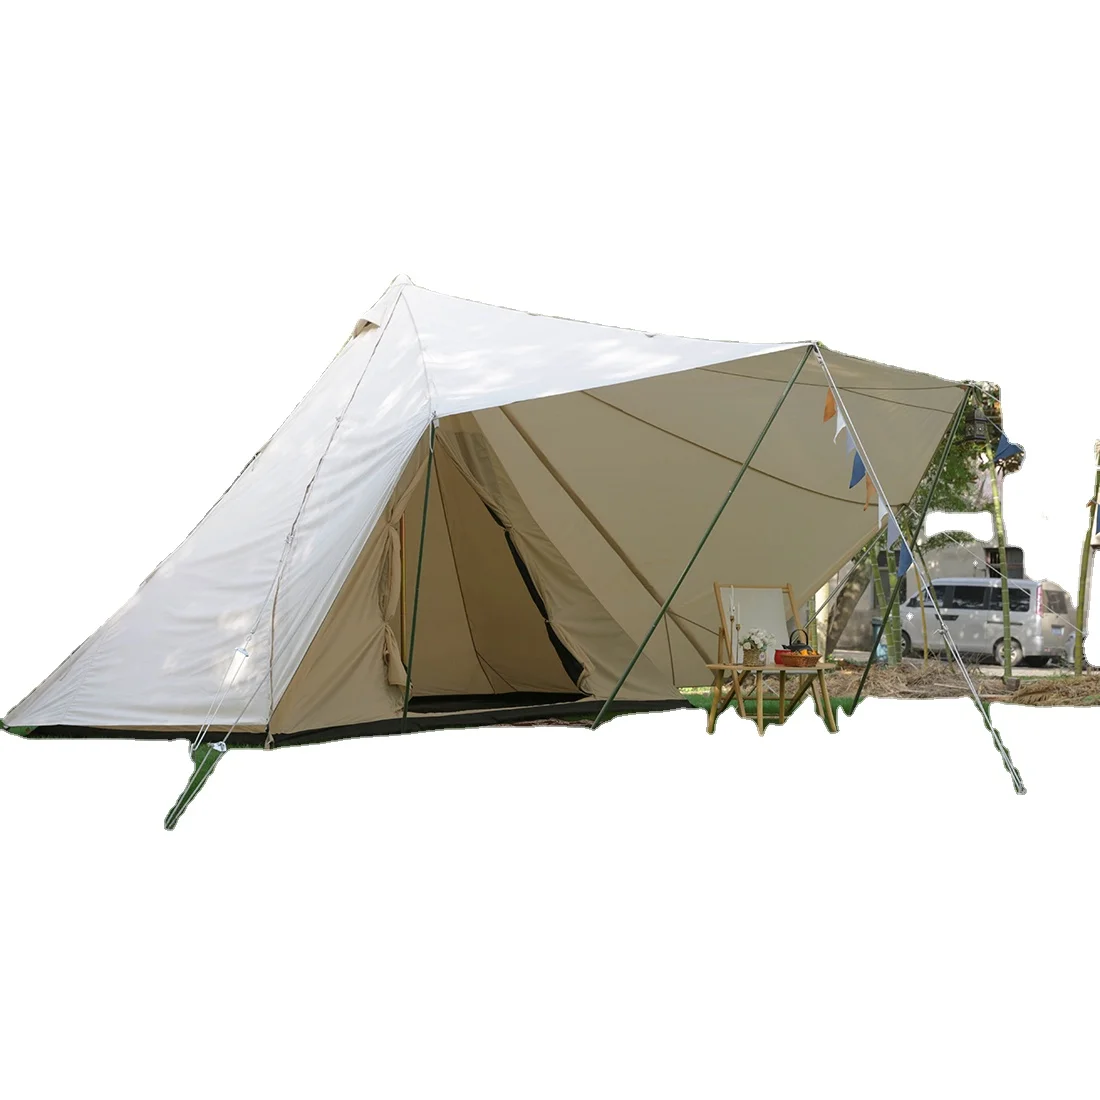 

3D Max Outdoor Double Doors Gamping Canopy Pyramid One Pole Tent Bat Shape Indian Canvas Teepee Tent With Front Awning